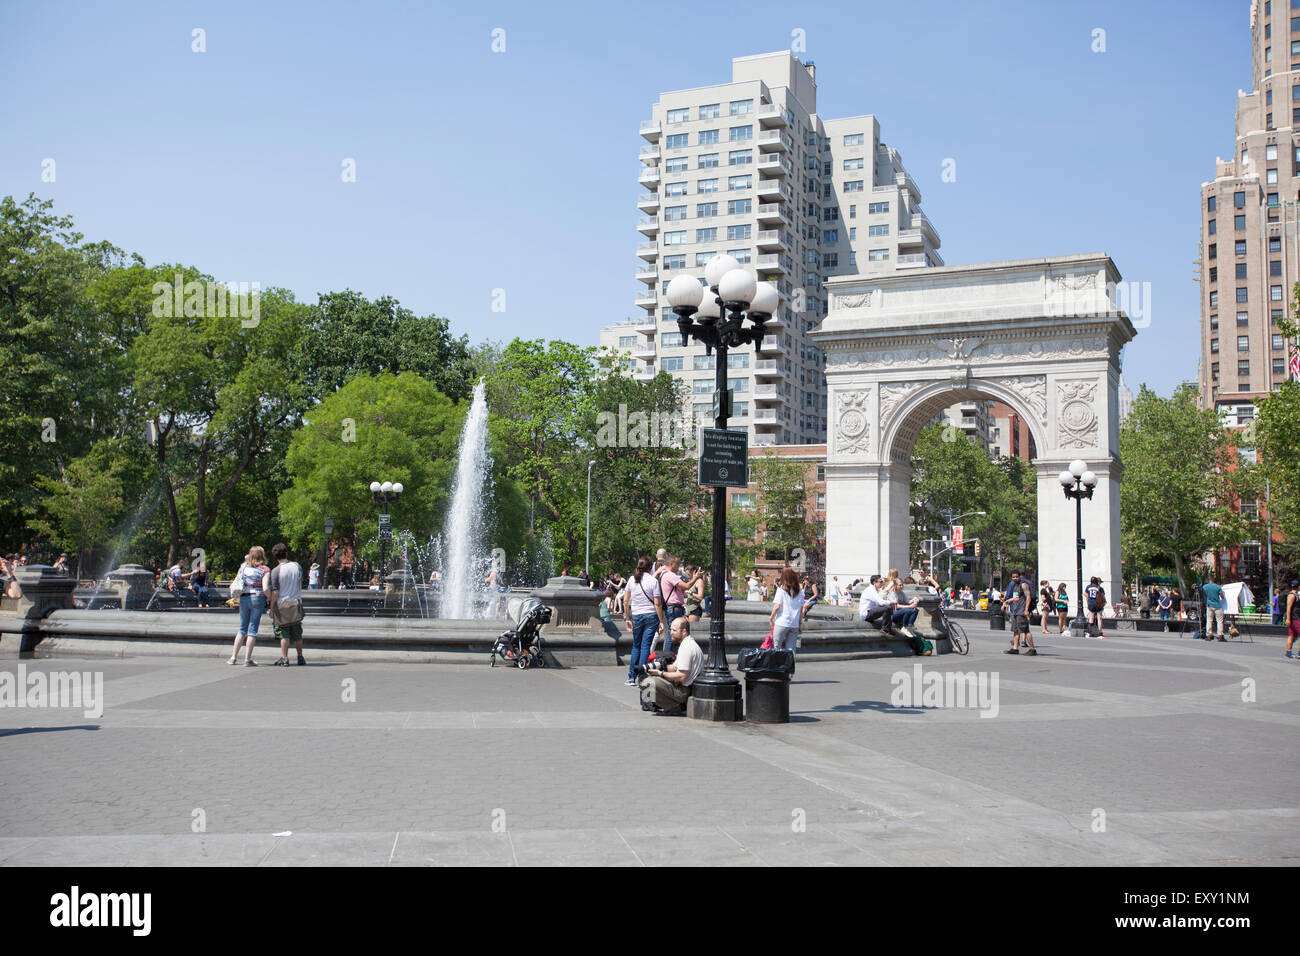 NEW YORK - May 27, 2015: Washington Square Park is one of the best-known of New York City's  public parks. At 9.75 acres , it is Stock Photo